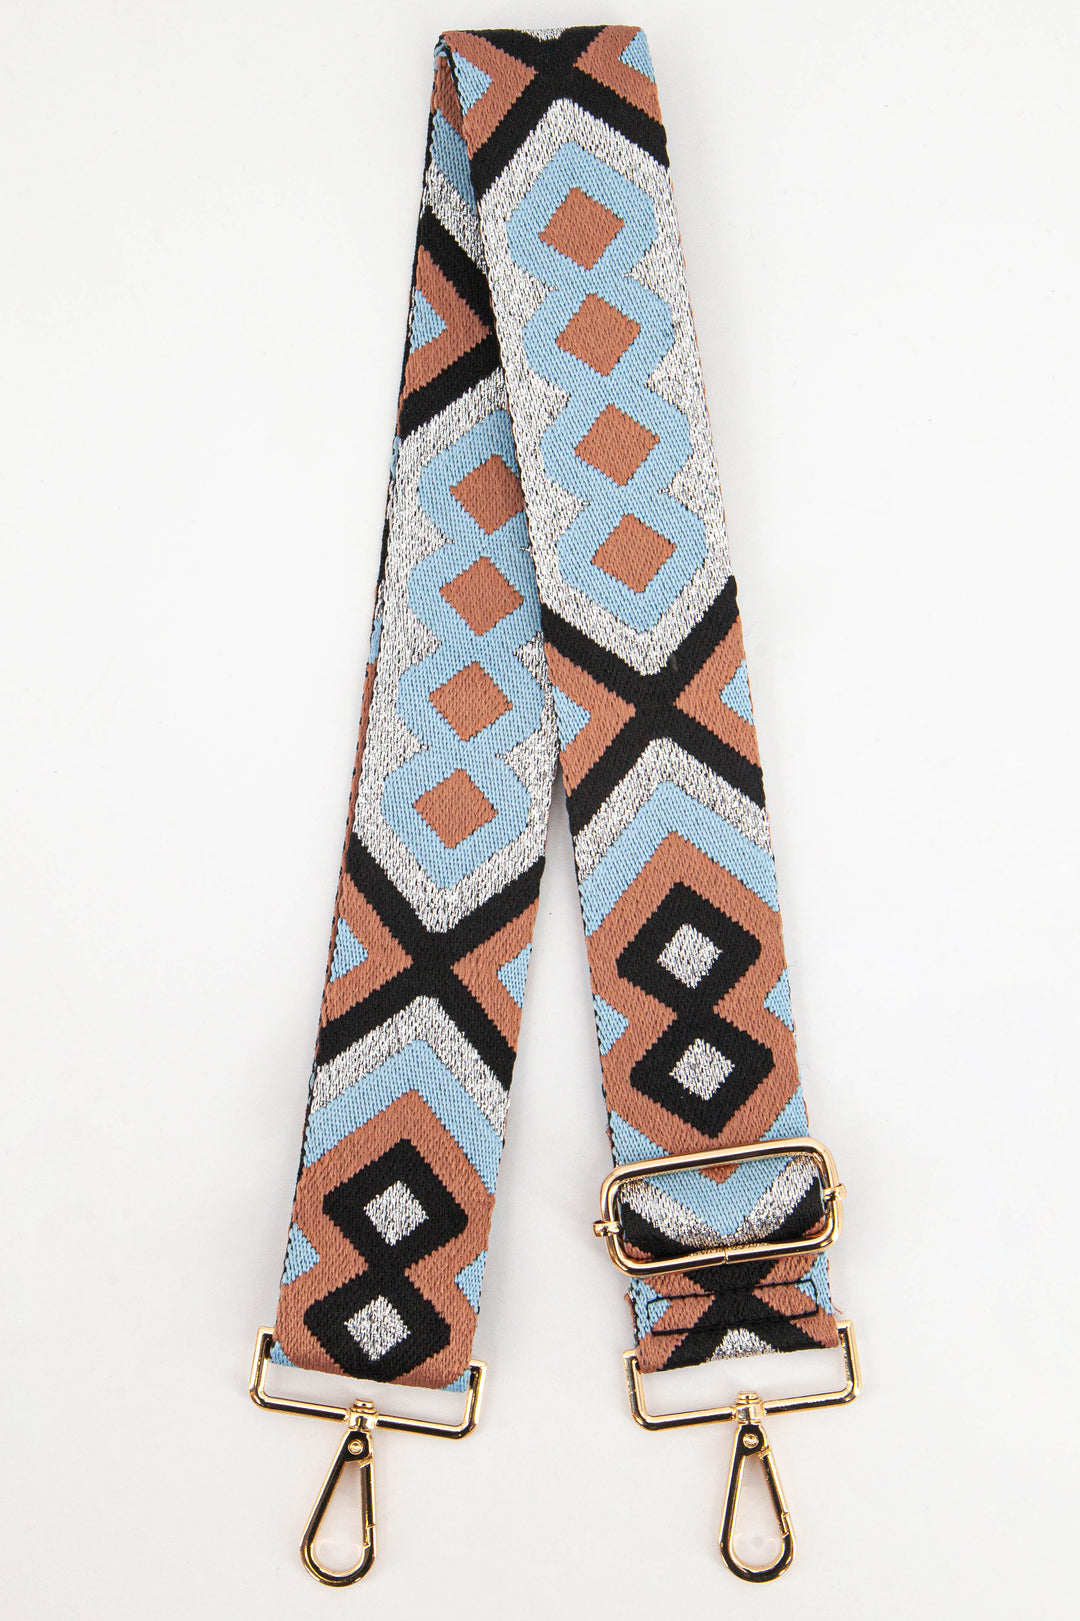 wide woven bag strap with a light blue and dusty pink aztec print with silver metallic glitter threading throughout